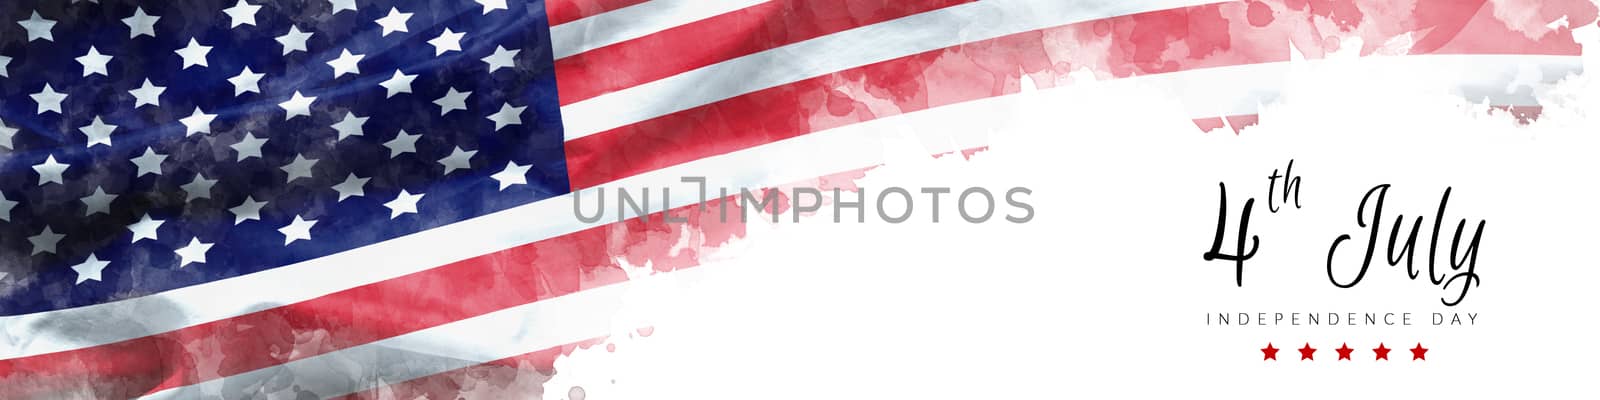 happy Independence Day greeting card american flag grunge background by asiandelight